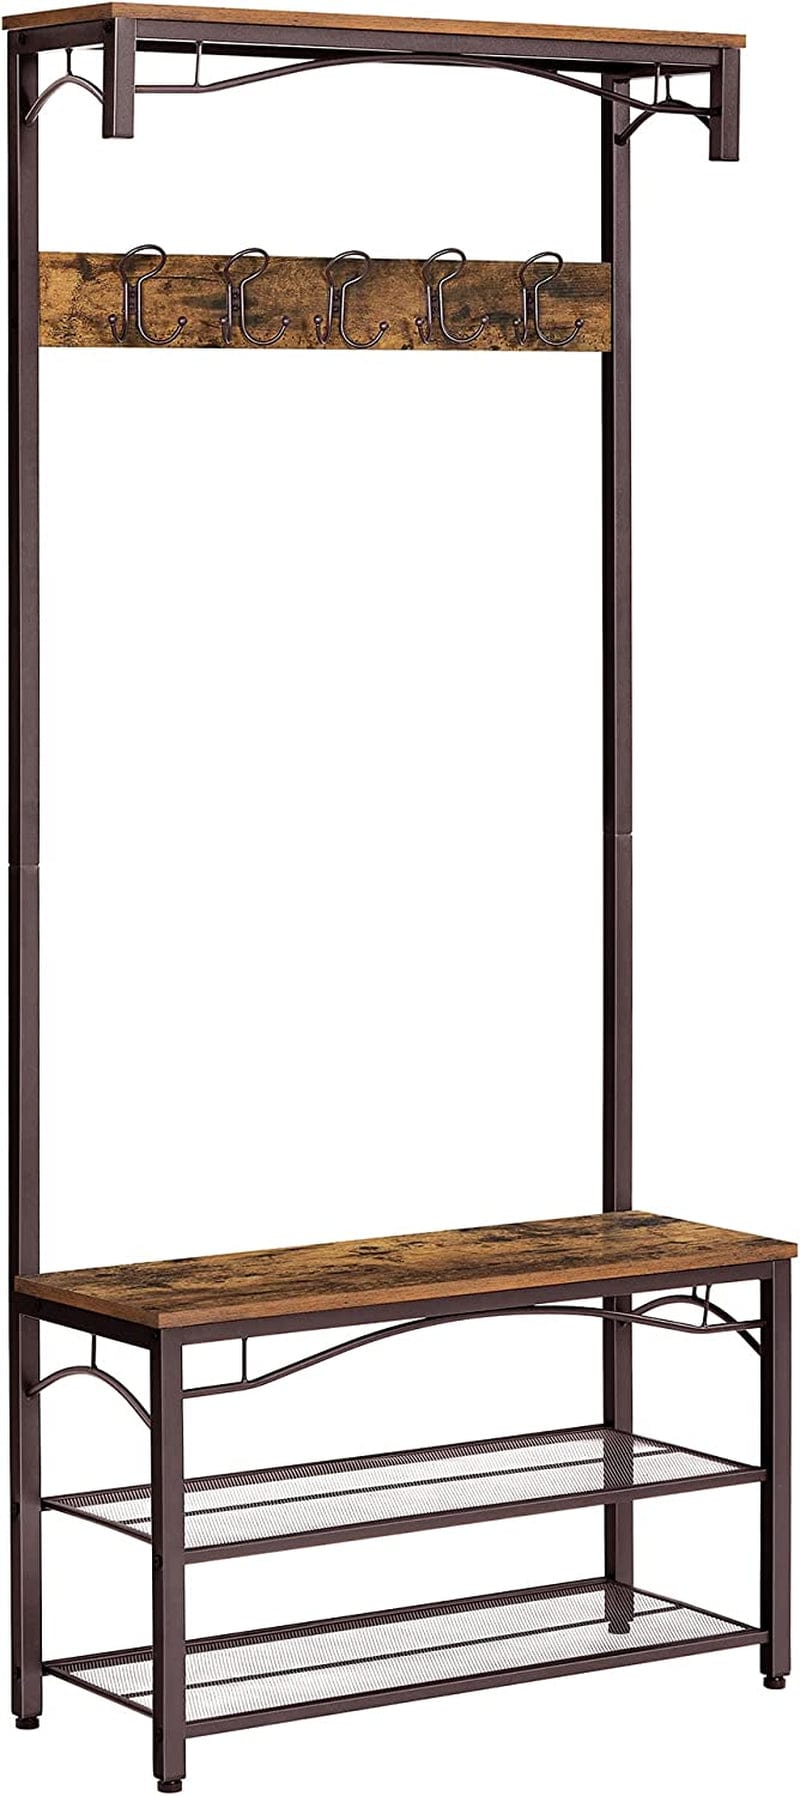 VASAGLE Shoe Bench Rack, 3-Tier Storage Shelf for Entryway Hallway Living Room, Industrial Accent Furniture with Steel Frame, 26”, Rustic Brown